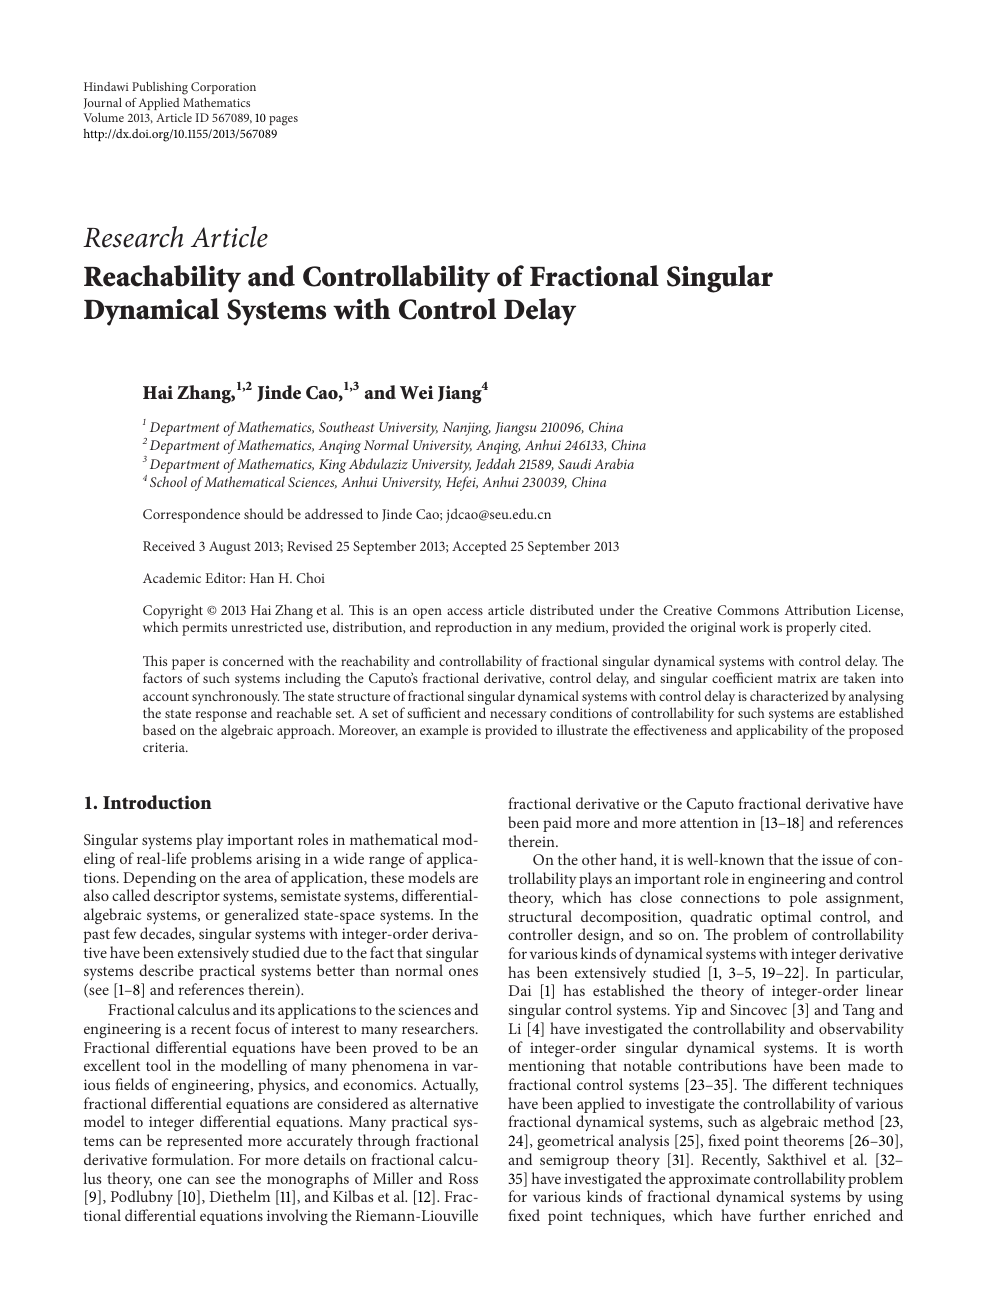 Reachability and Controllability of Fractional Singular Dynamical 